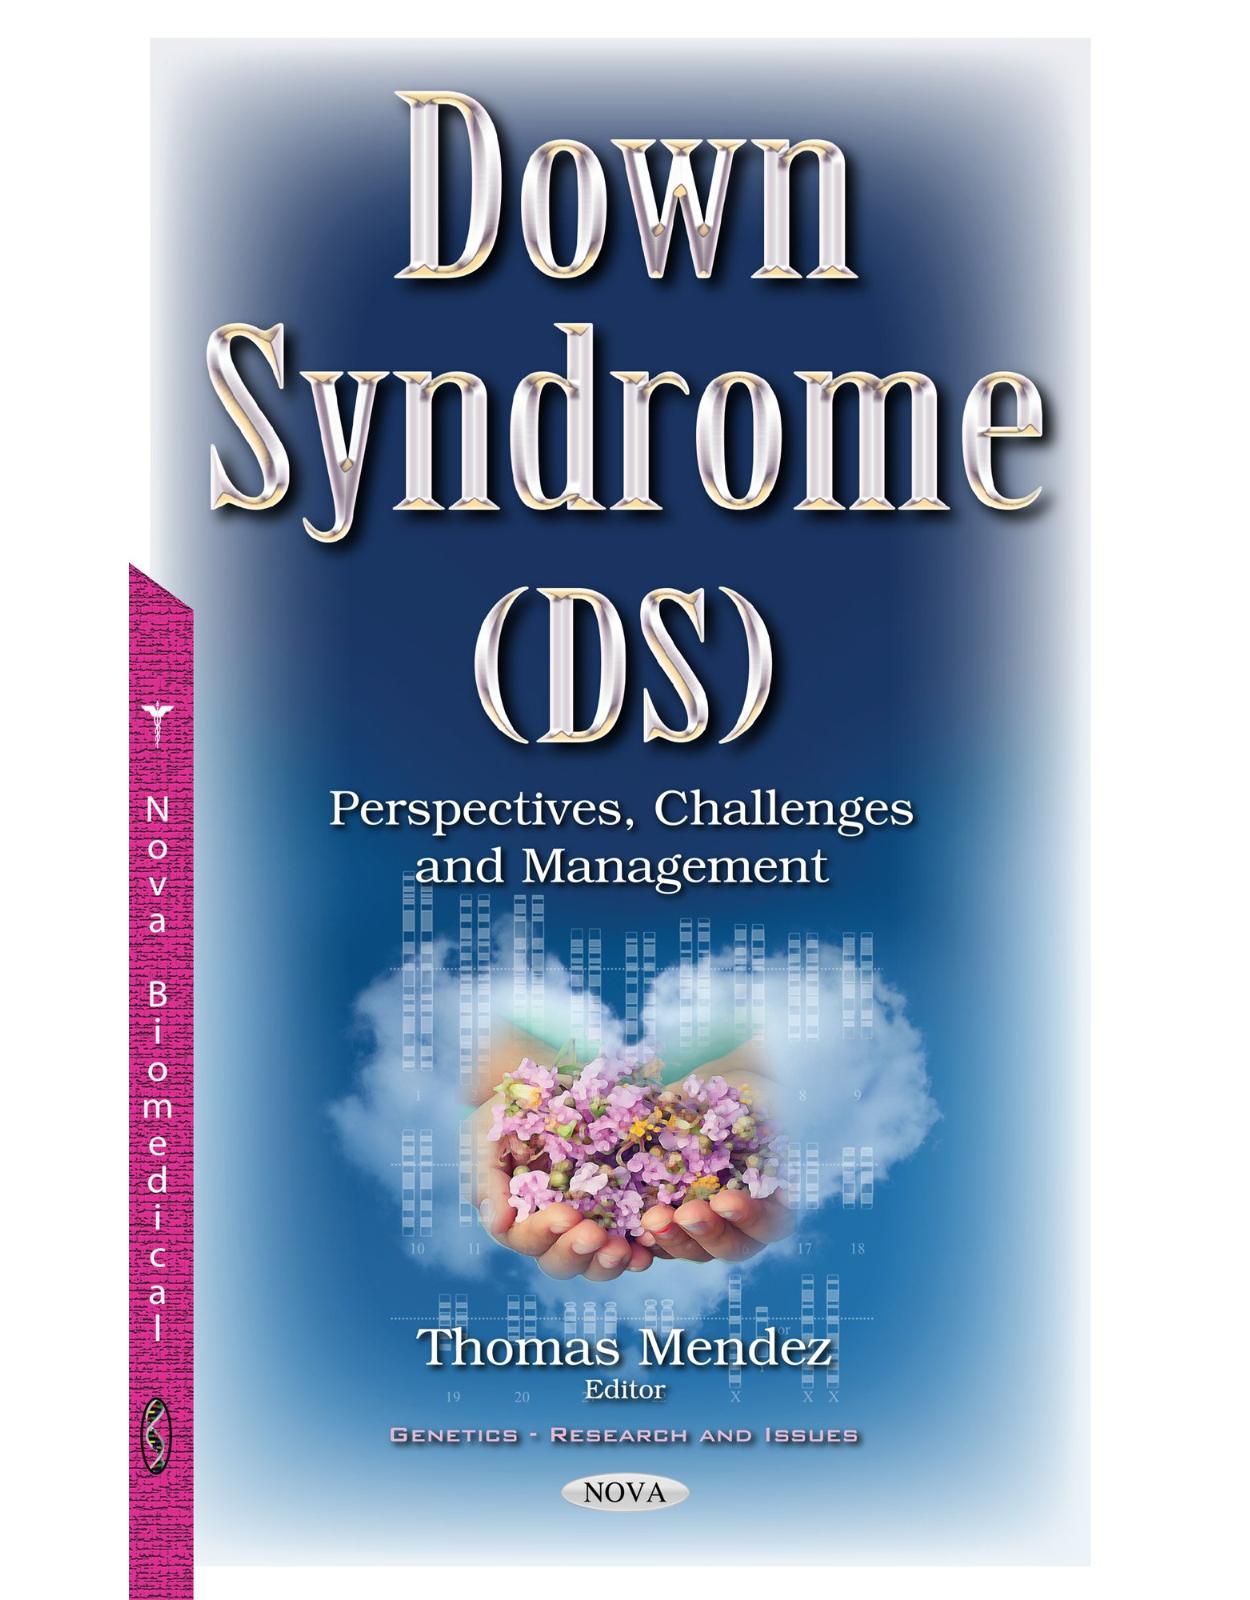 Down Syndrome (DS): Perspectives, Challenges & Management